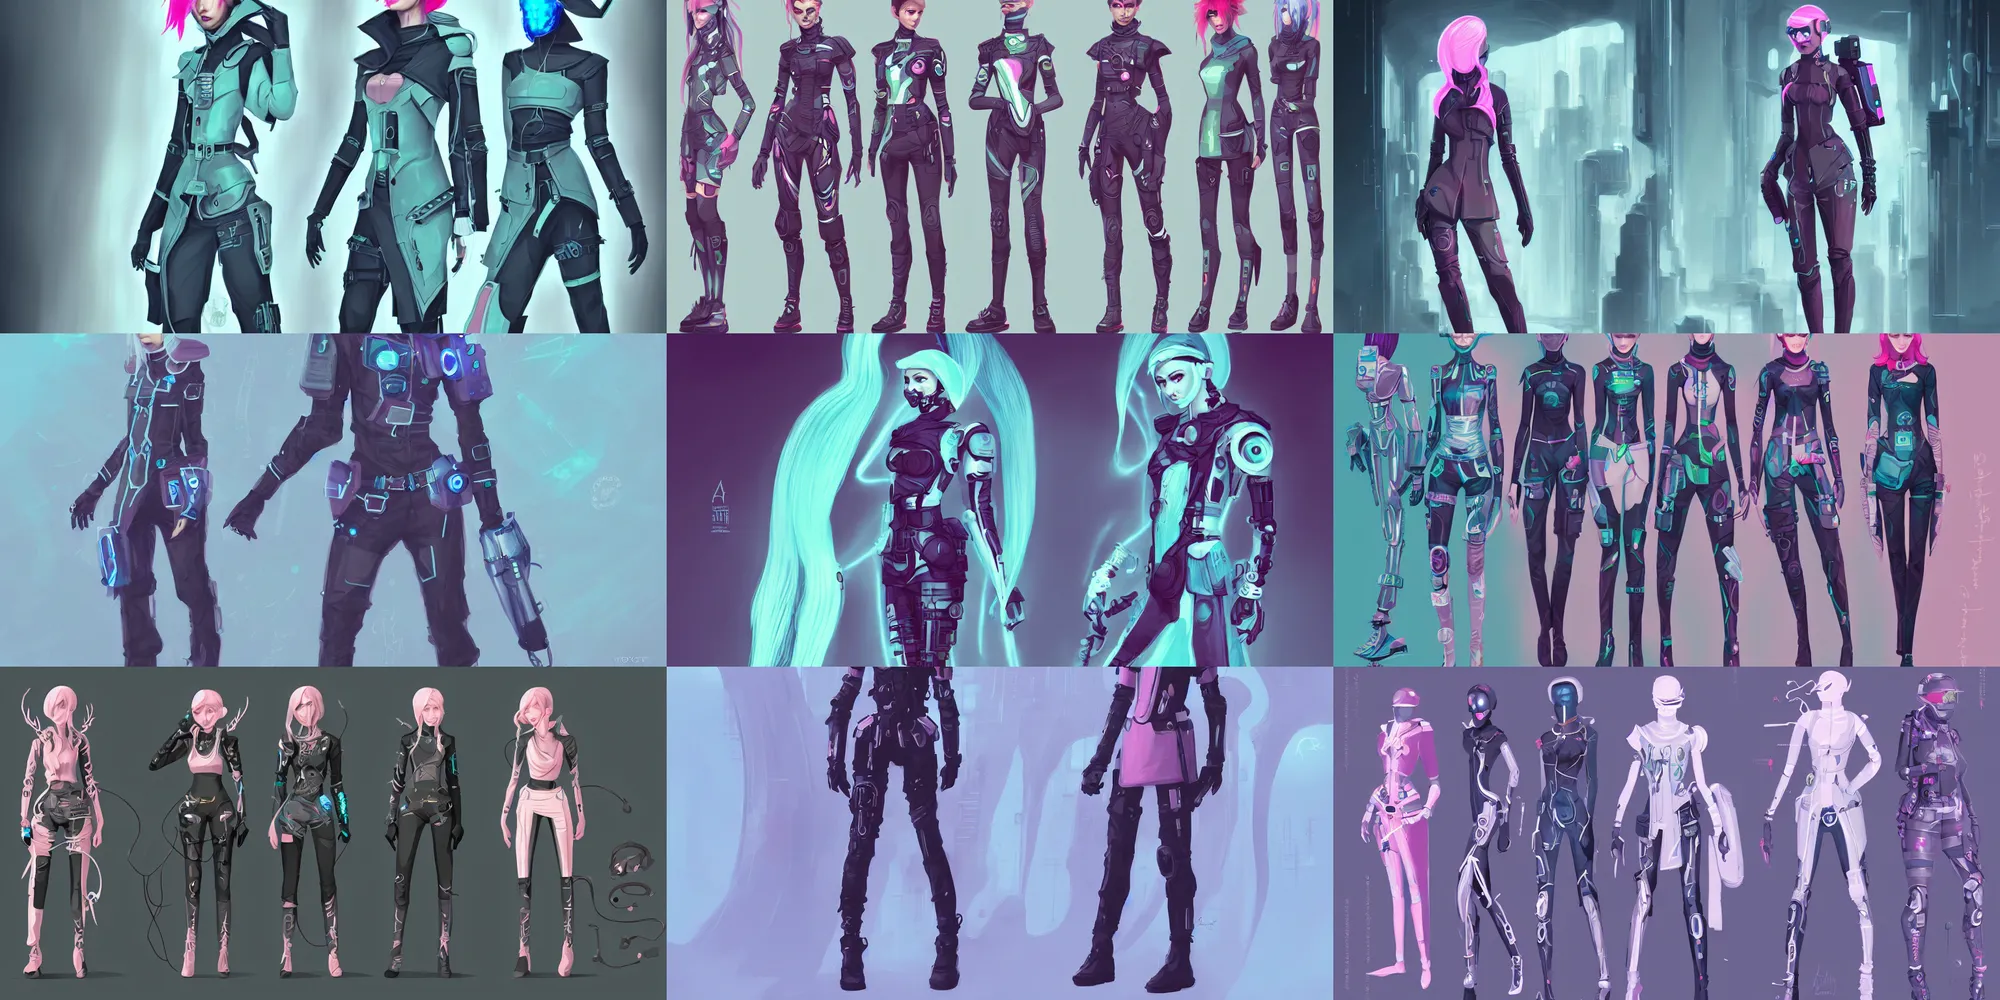 Prompt: collection of character design, futuristic, medic, cyberpunk, fantasy, trendy fashion, elegant, collection, pack, pastel color, vibrant, elf, nature, sleek